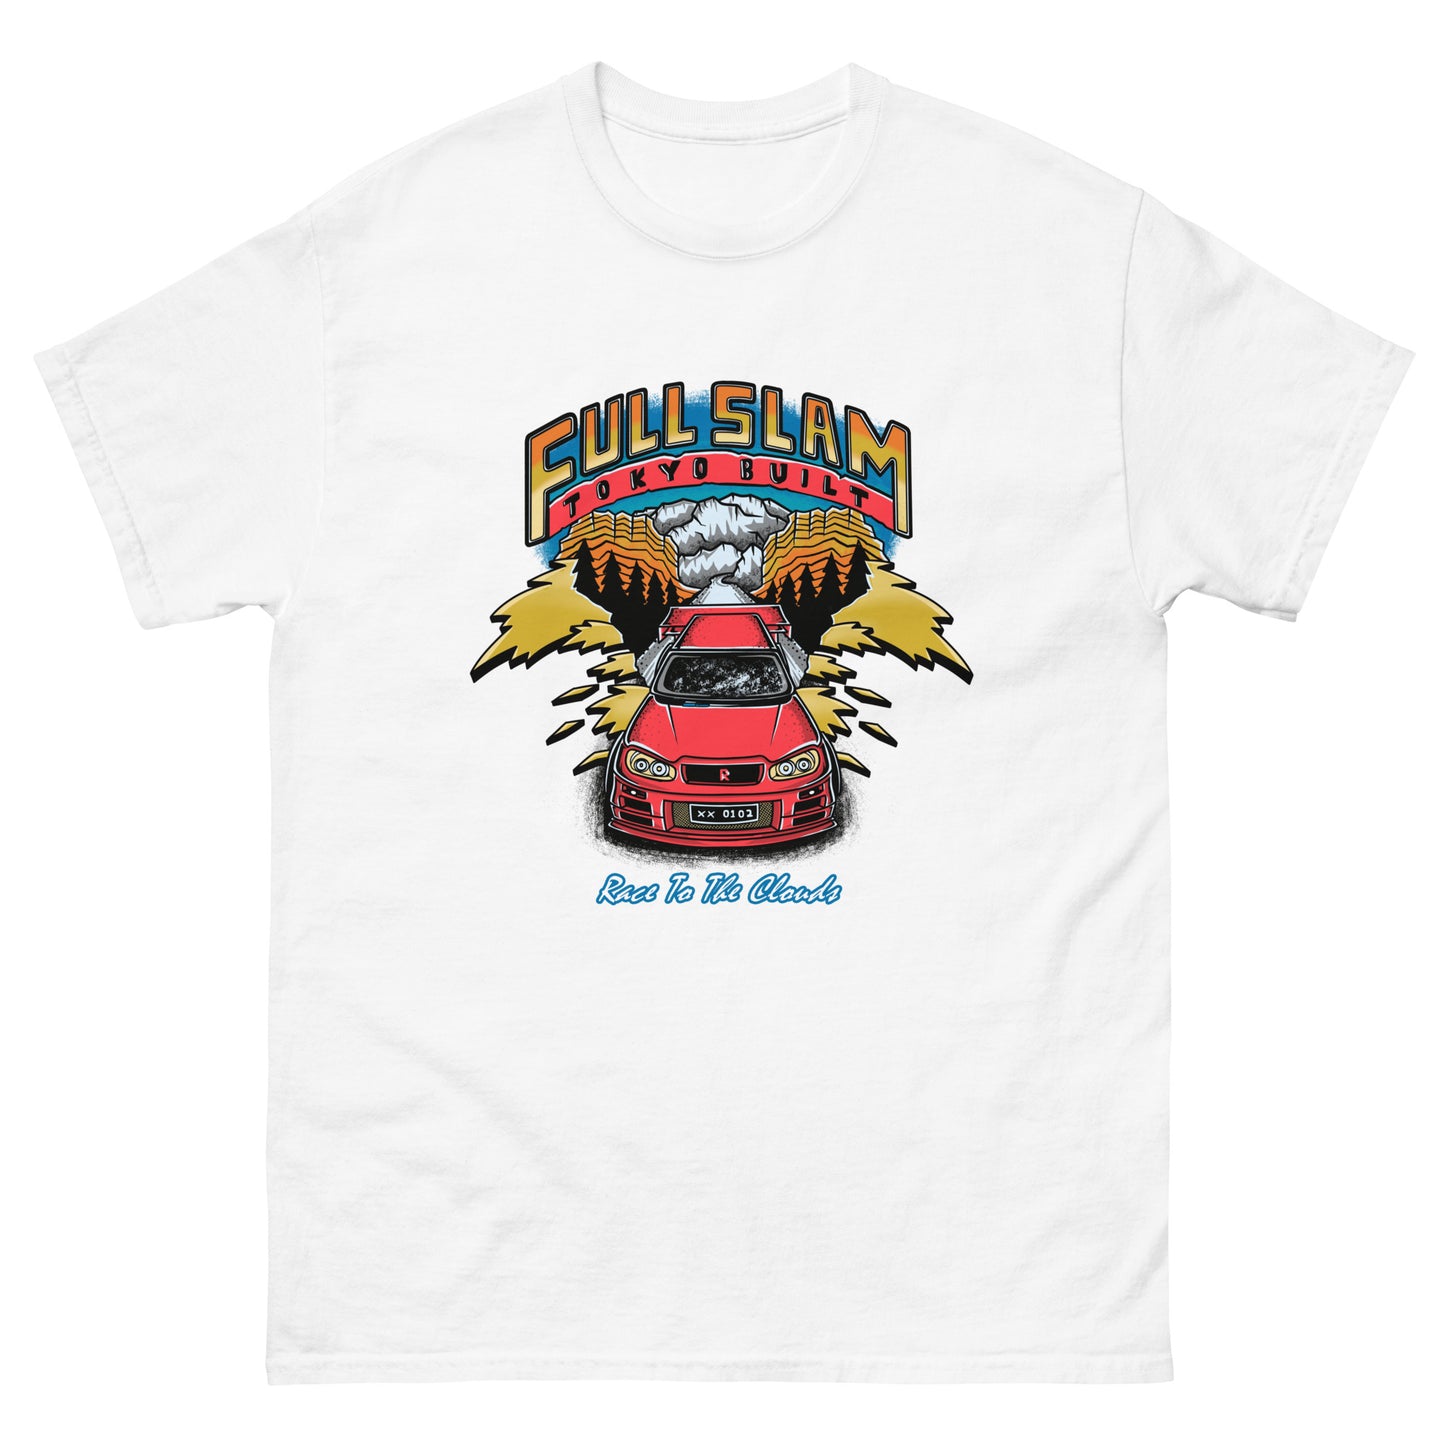 Race to the Clouds Tee